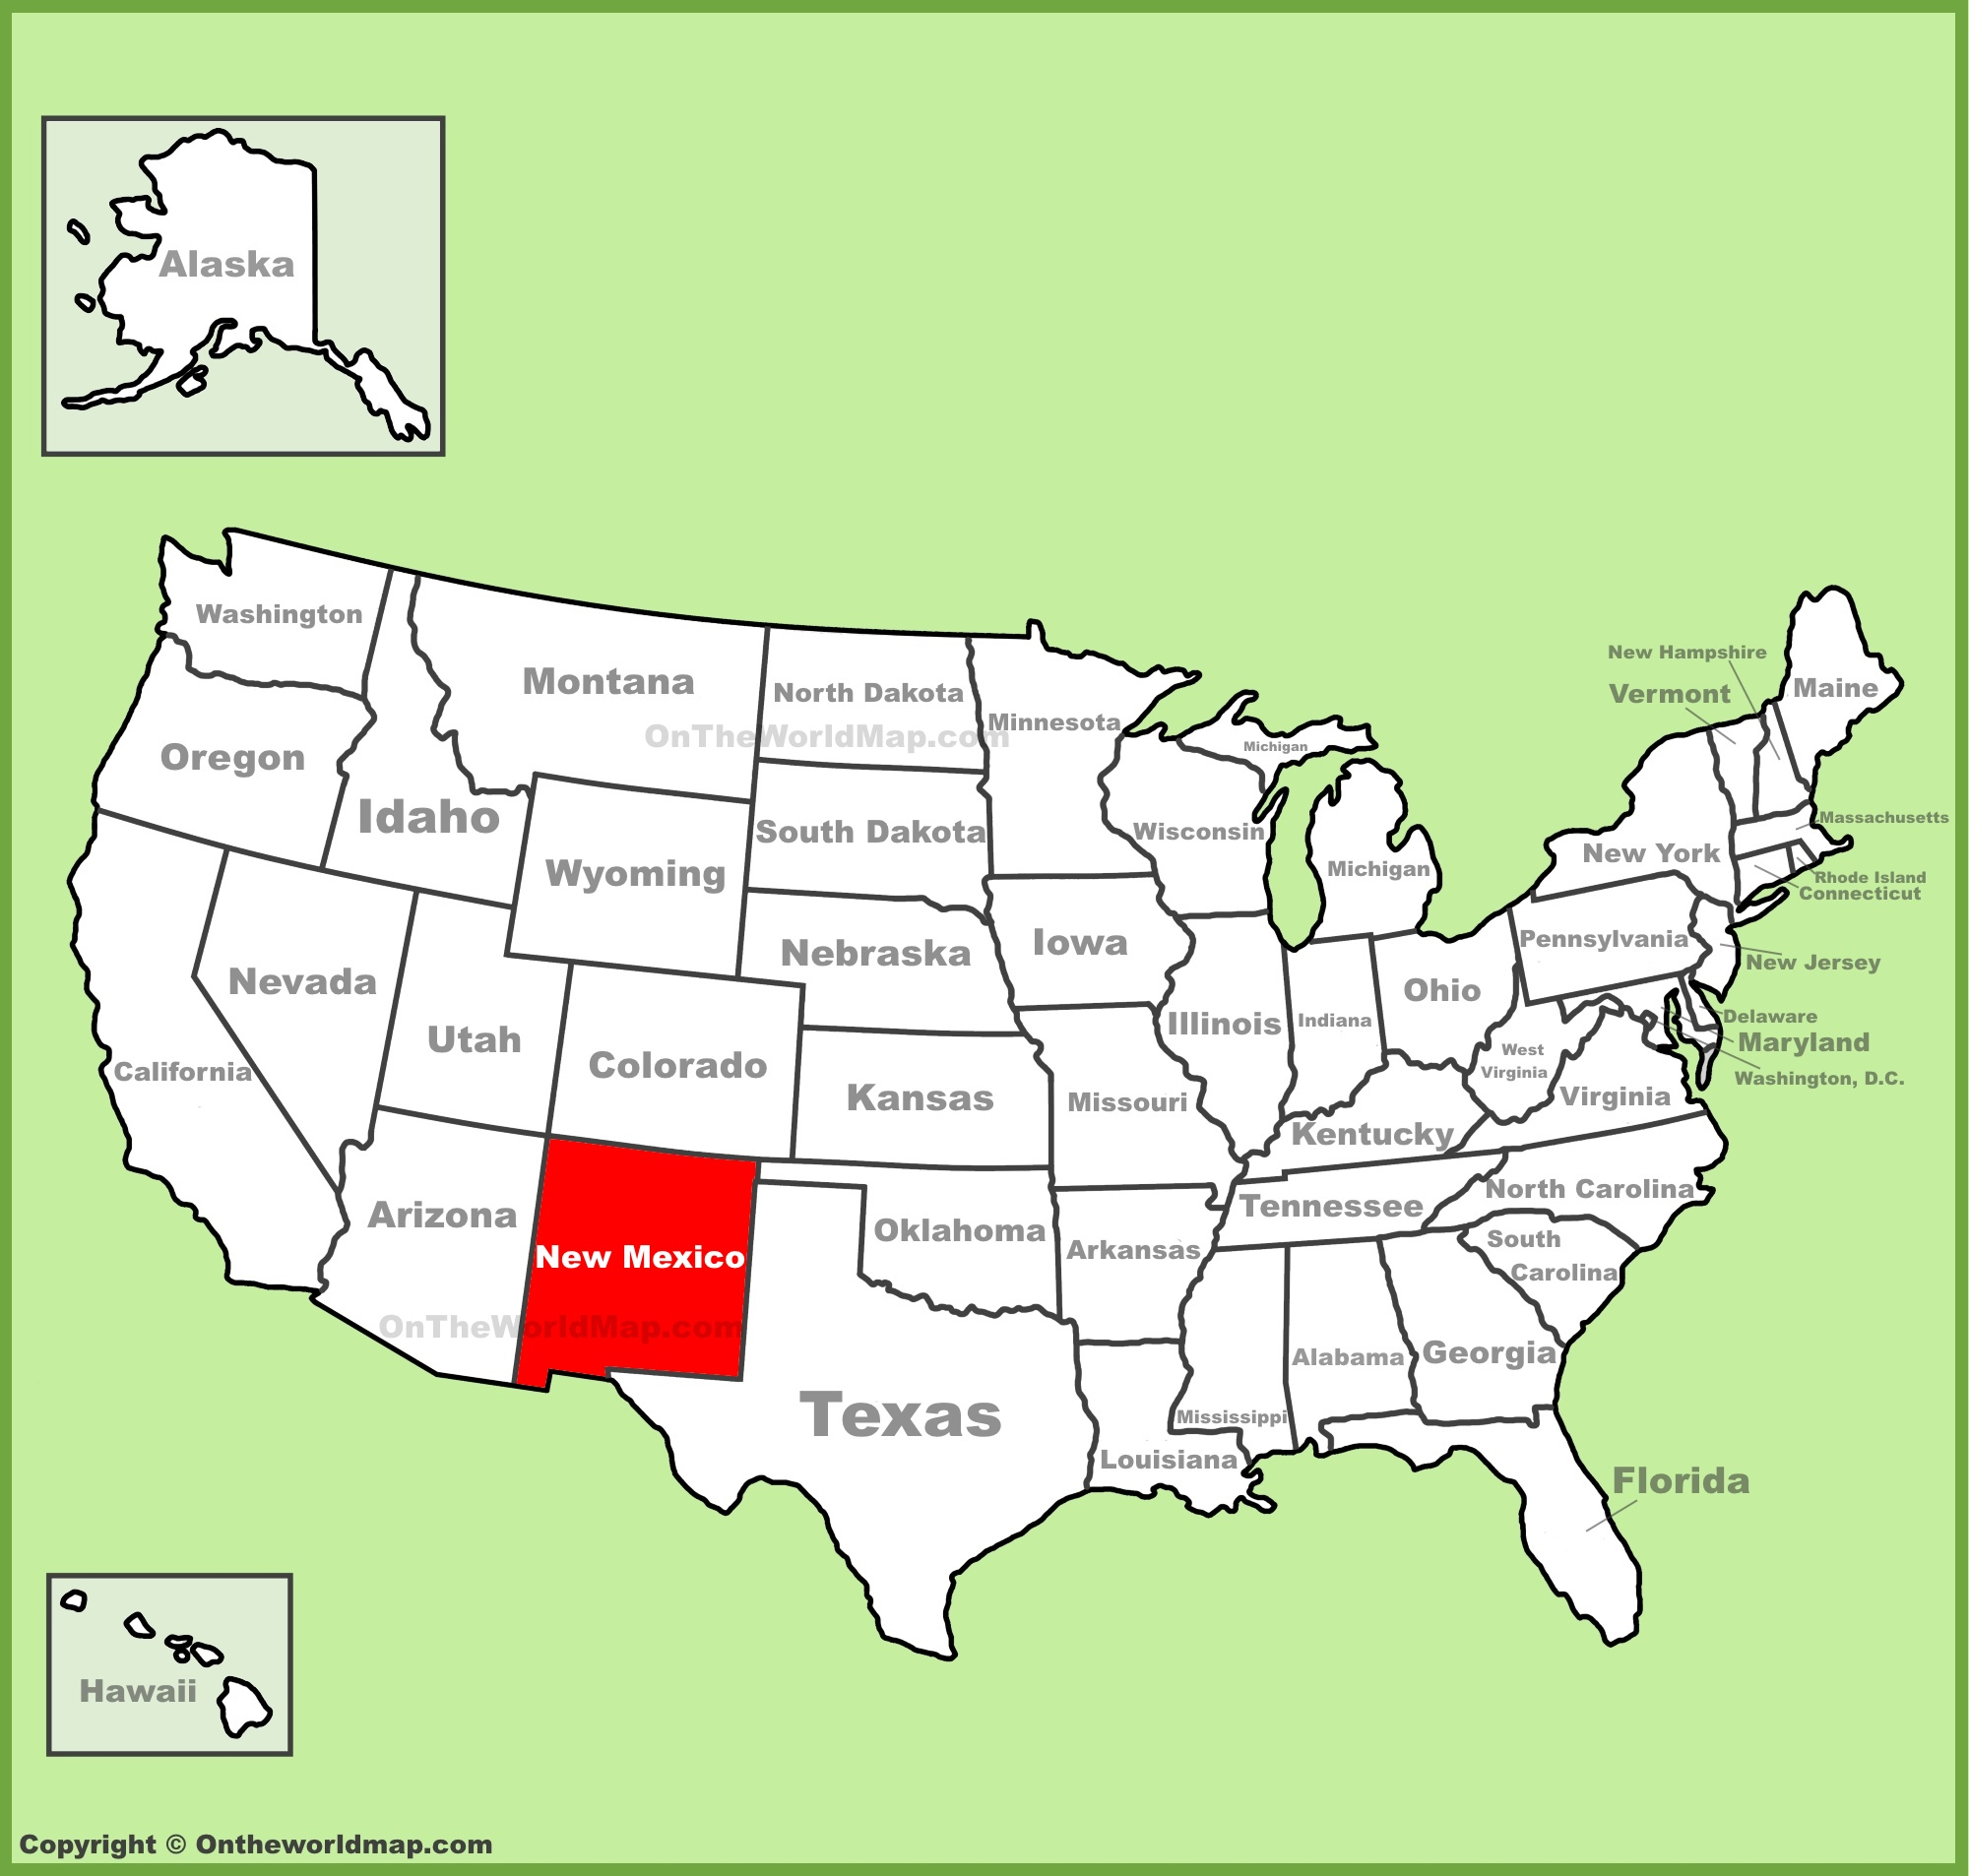 New Mexico State Maps | Usa | Maps Of New Mexico (Nm) - Texas New Mexico Map